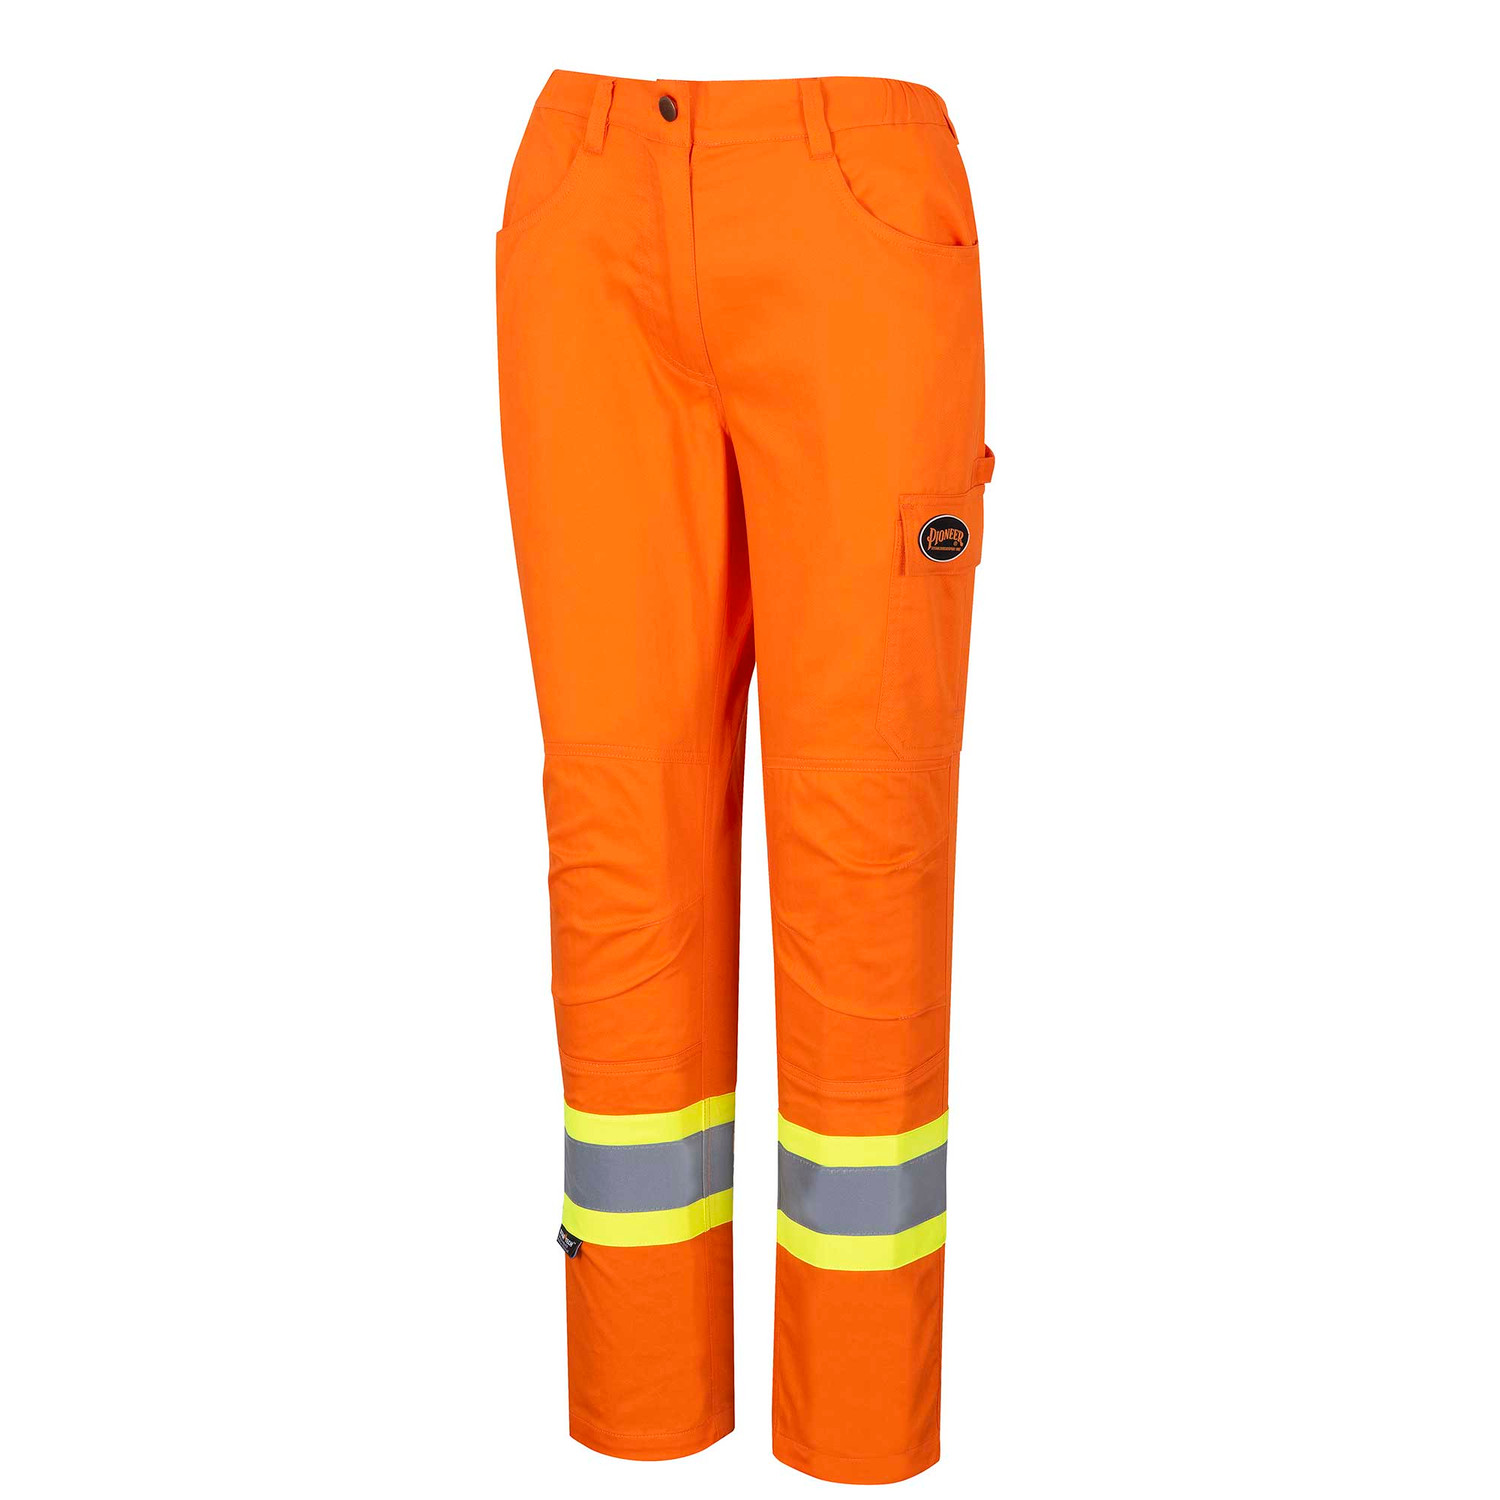 Pioneer Women's Cotton Blend Safety Pants